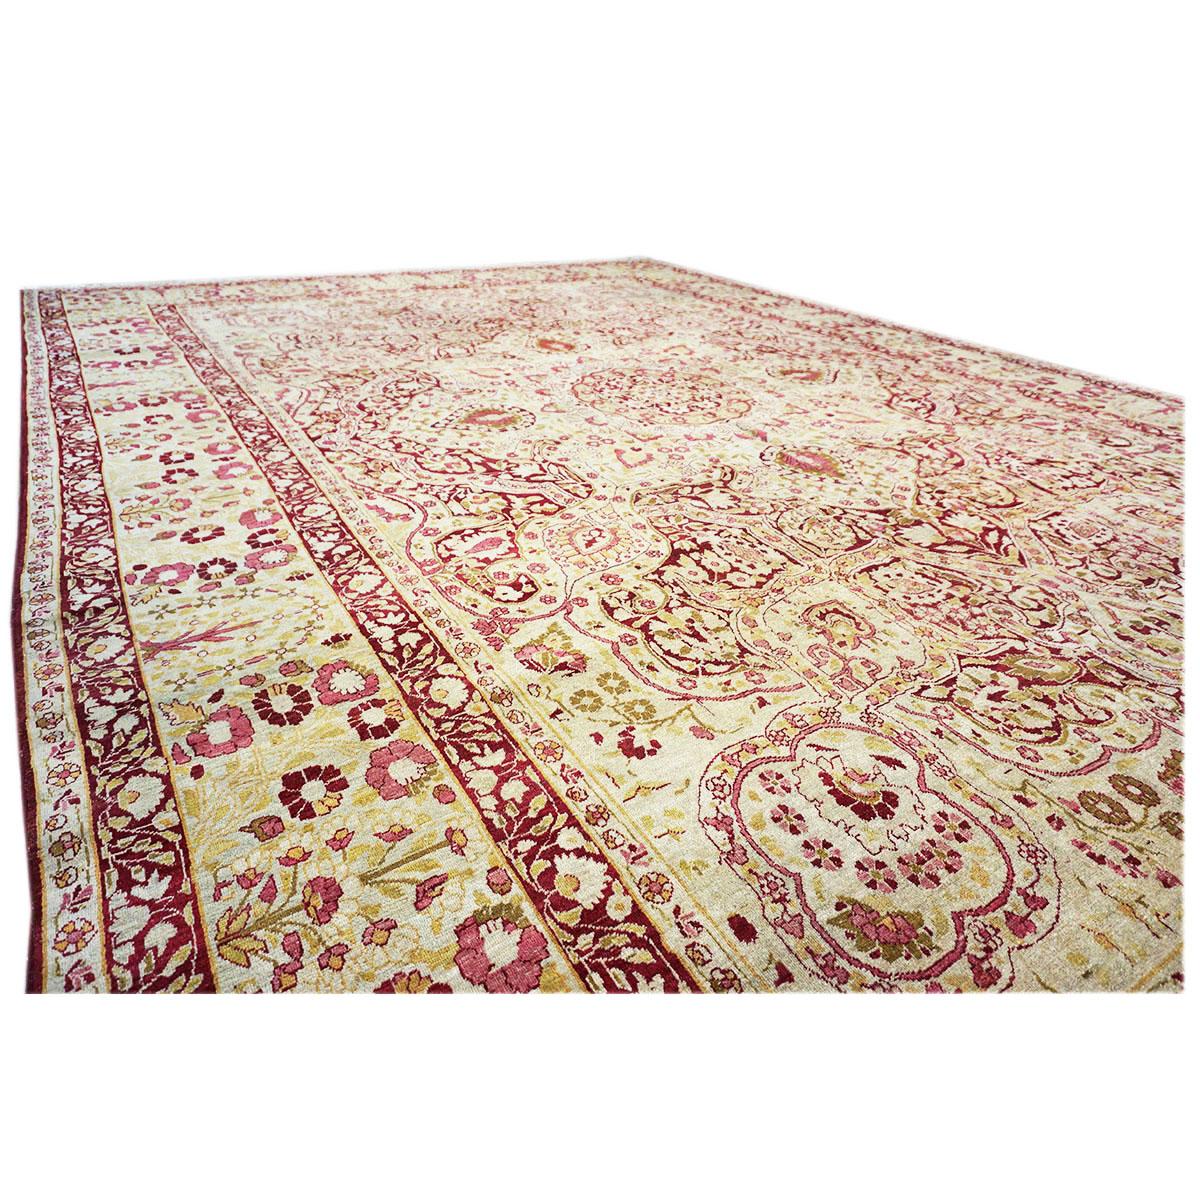 19th Century Antique Persian Kerman Lavar 10x16 Pink & Ivory Handmade Wool Rug In Fair Condition For Sale In Houston, TX